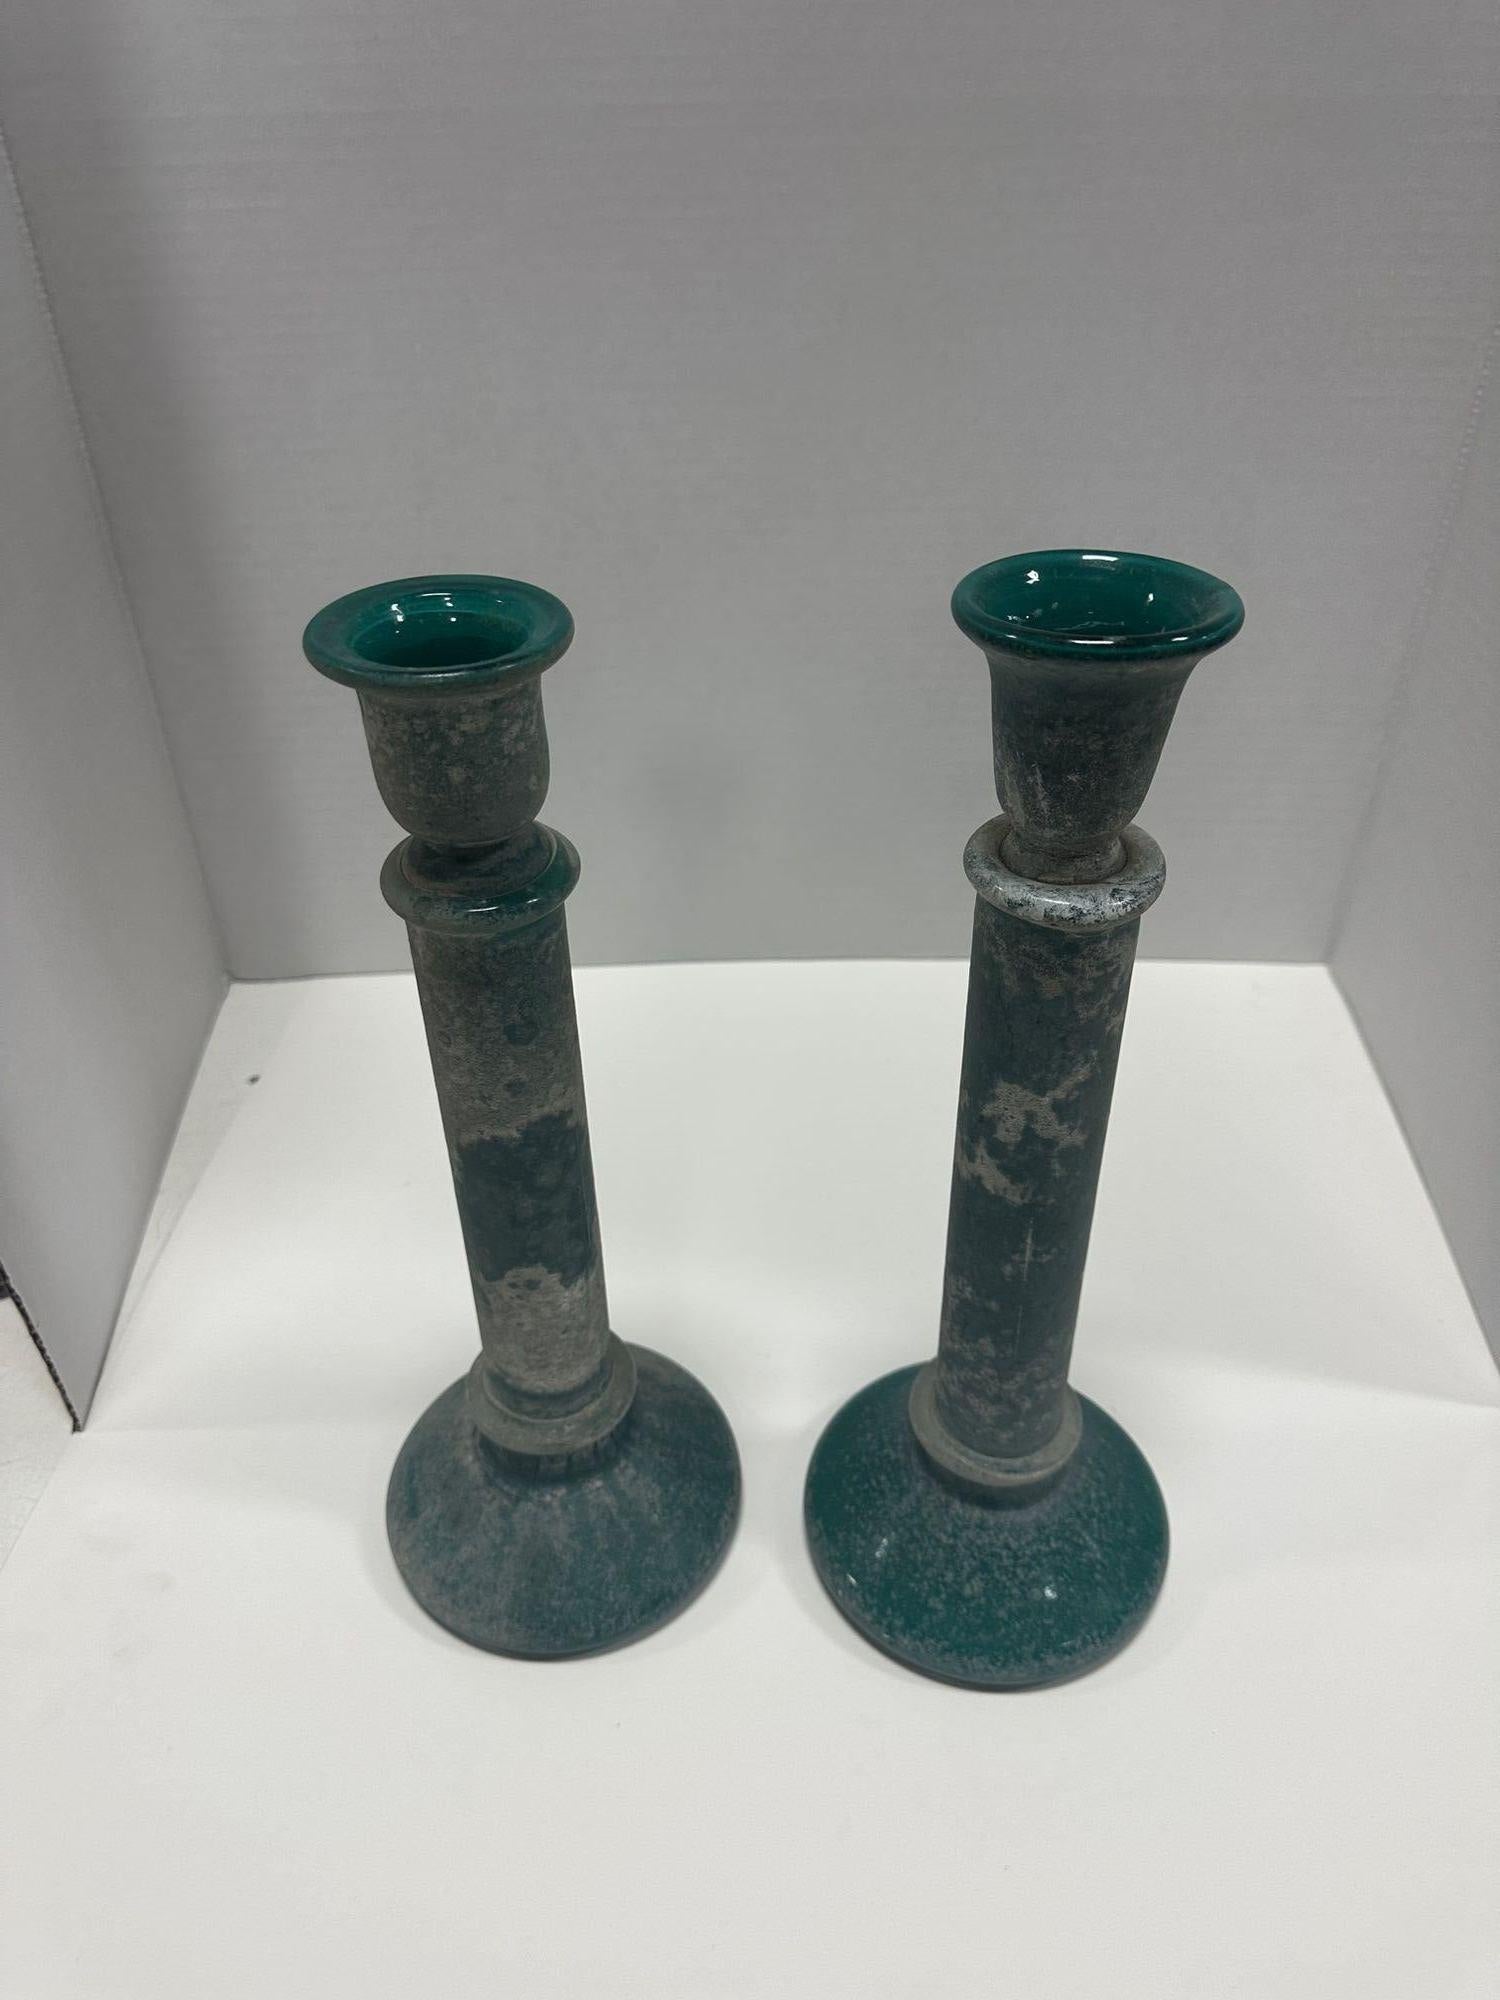 Enhance your interior decor with these charming Vintage Candlesticks with Turquoise Frosted Glass texture. This delightful pair of candle holders exudes a timeless appeal with their elegant frosted glass and beautiful turquoise hue. Perfect for